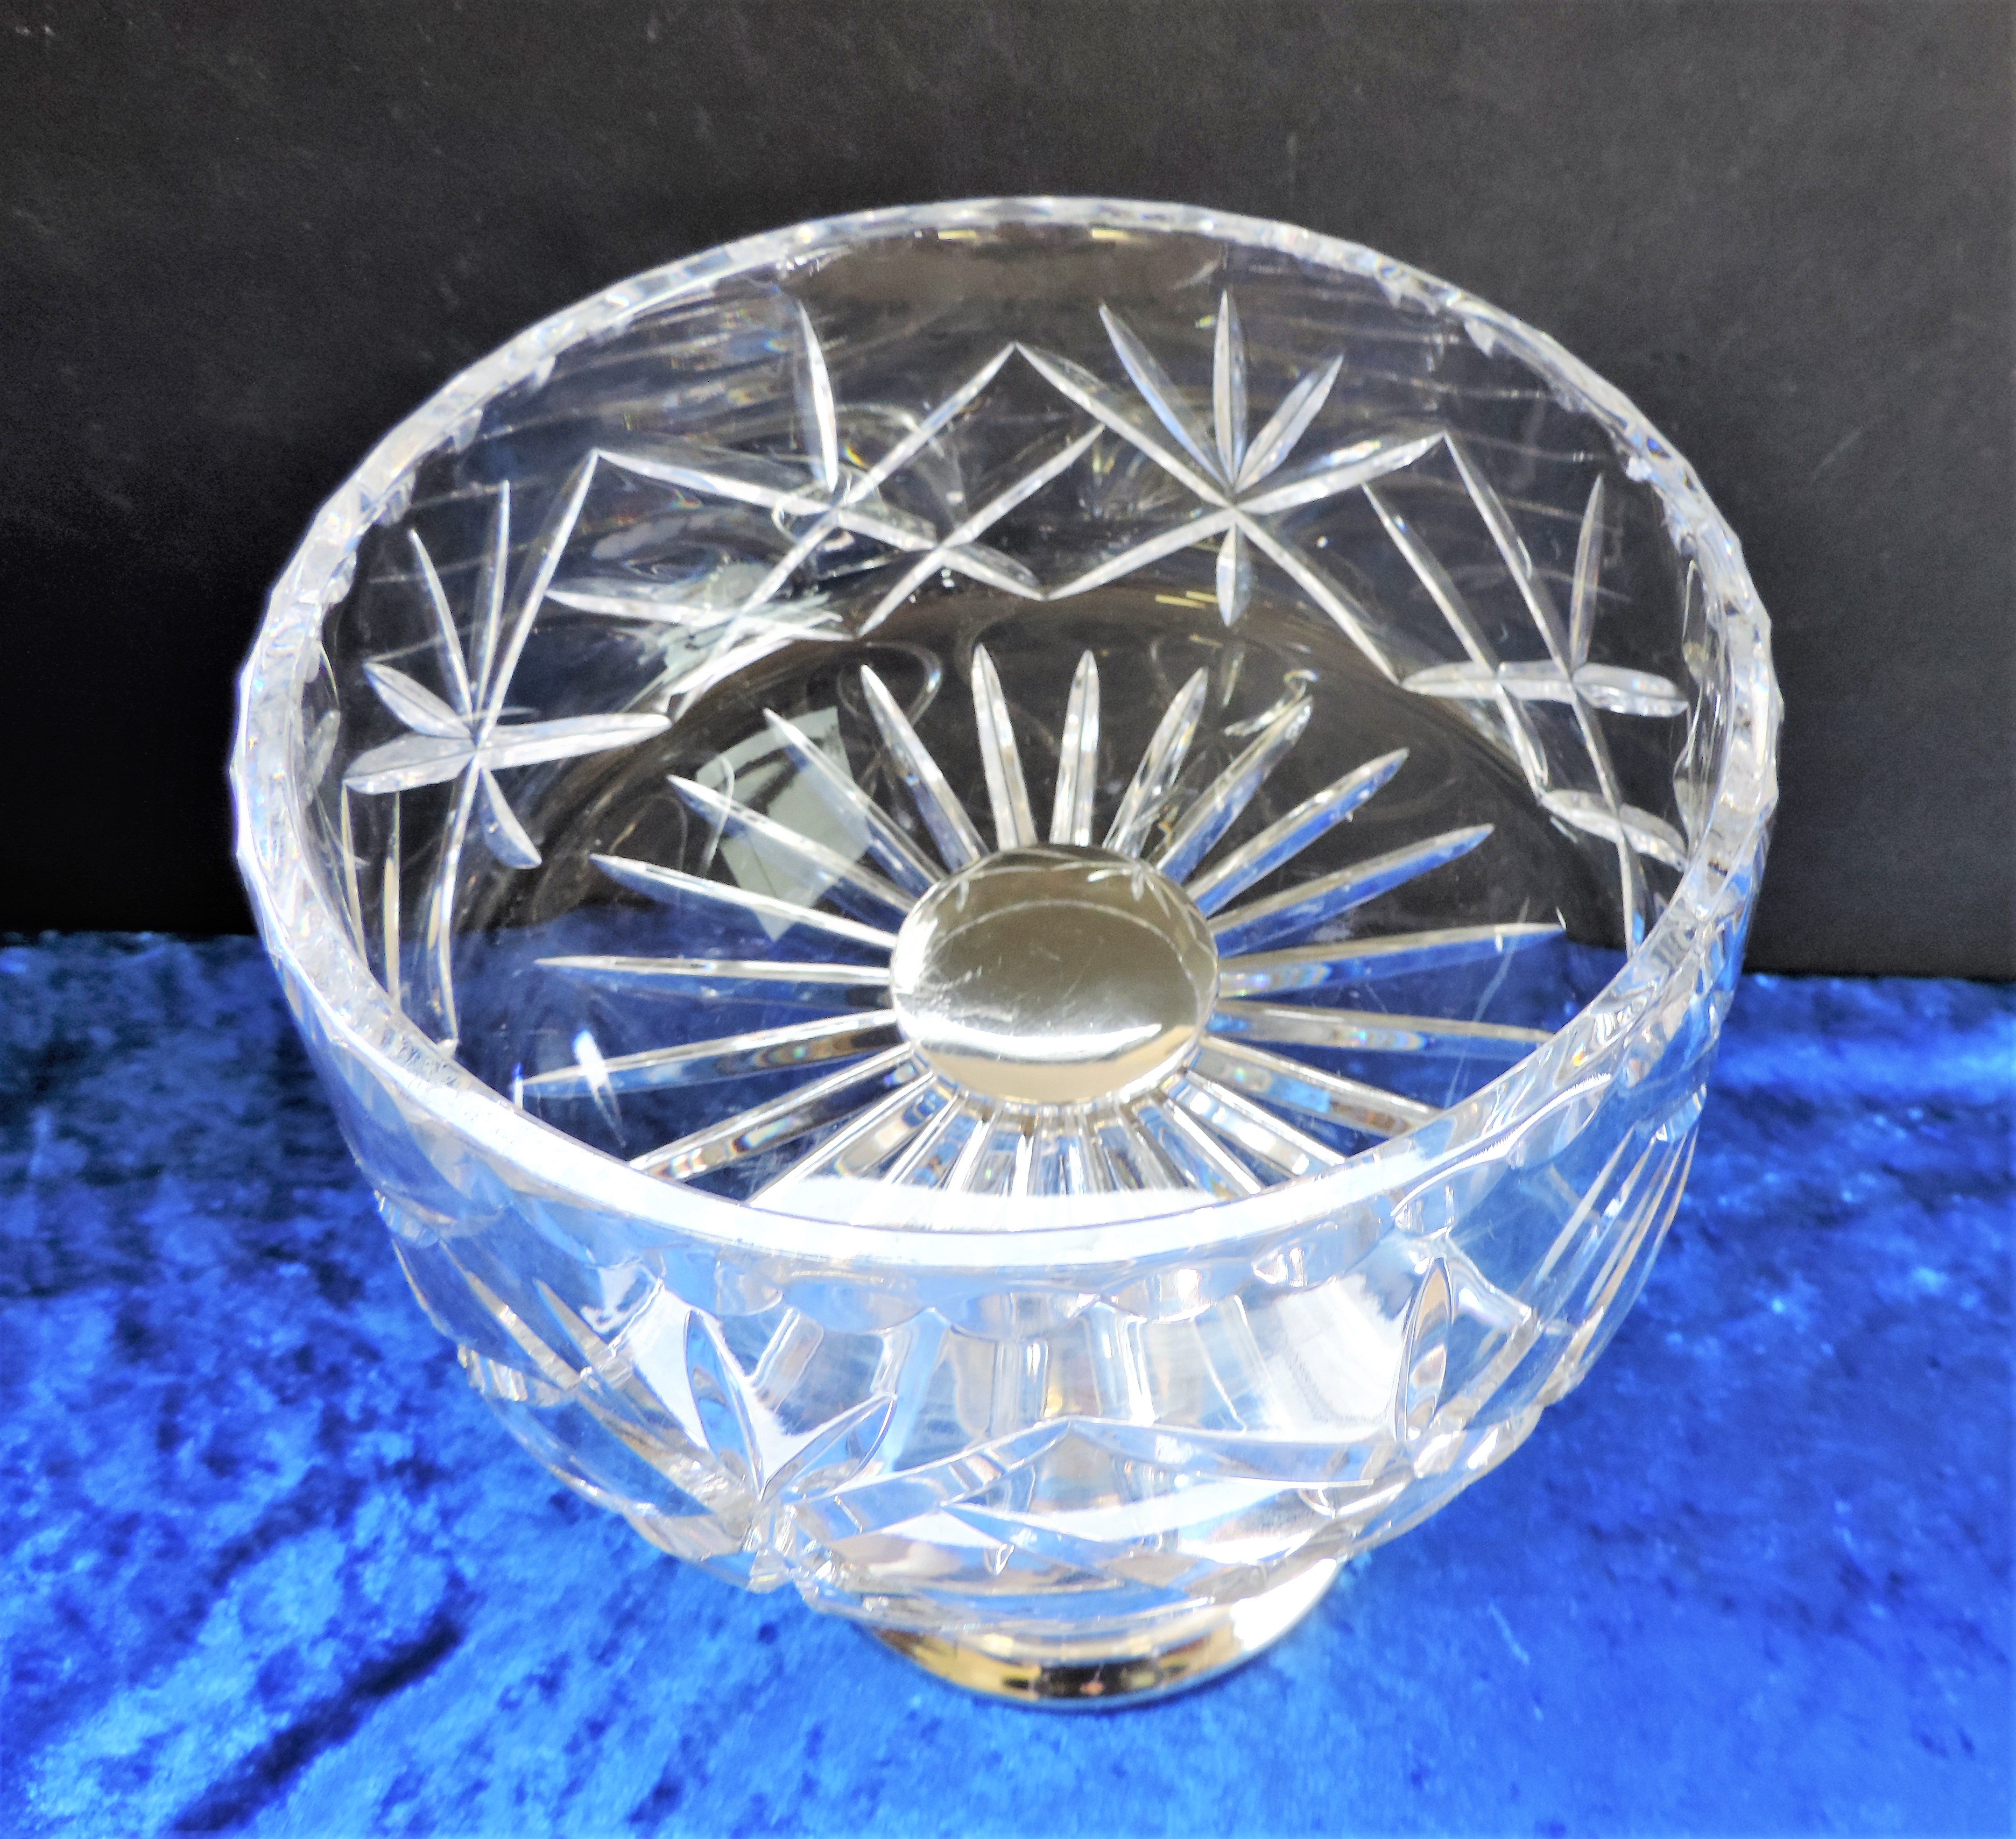 Vintage Elkington Silver Plate and Cut Crystal Table Centrepiece - Image 4 of 6